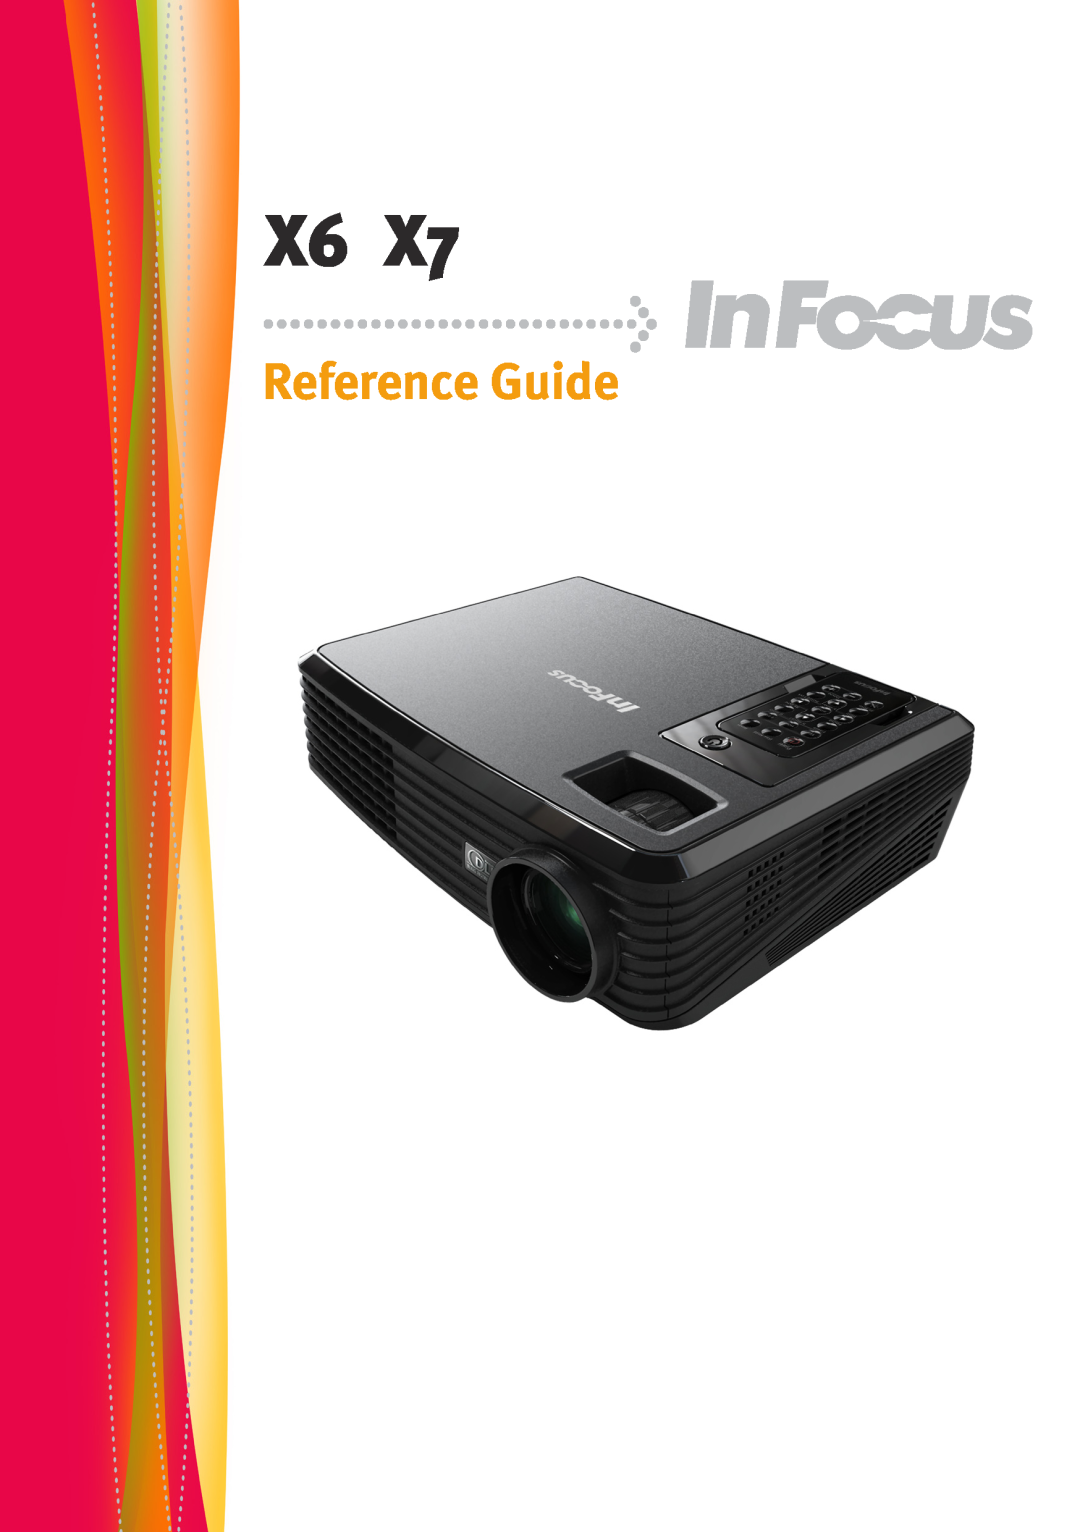 InFocus manual Performance Factor, Contributing More, X6 Overview, X7 Overview, The Highlights, A Shared Vision 